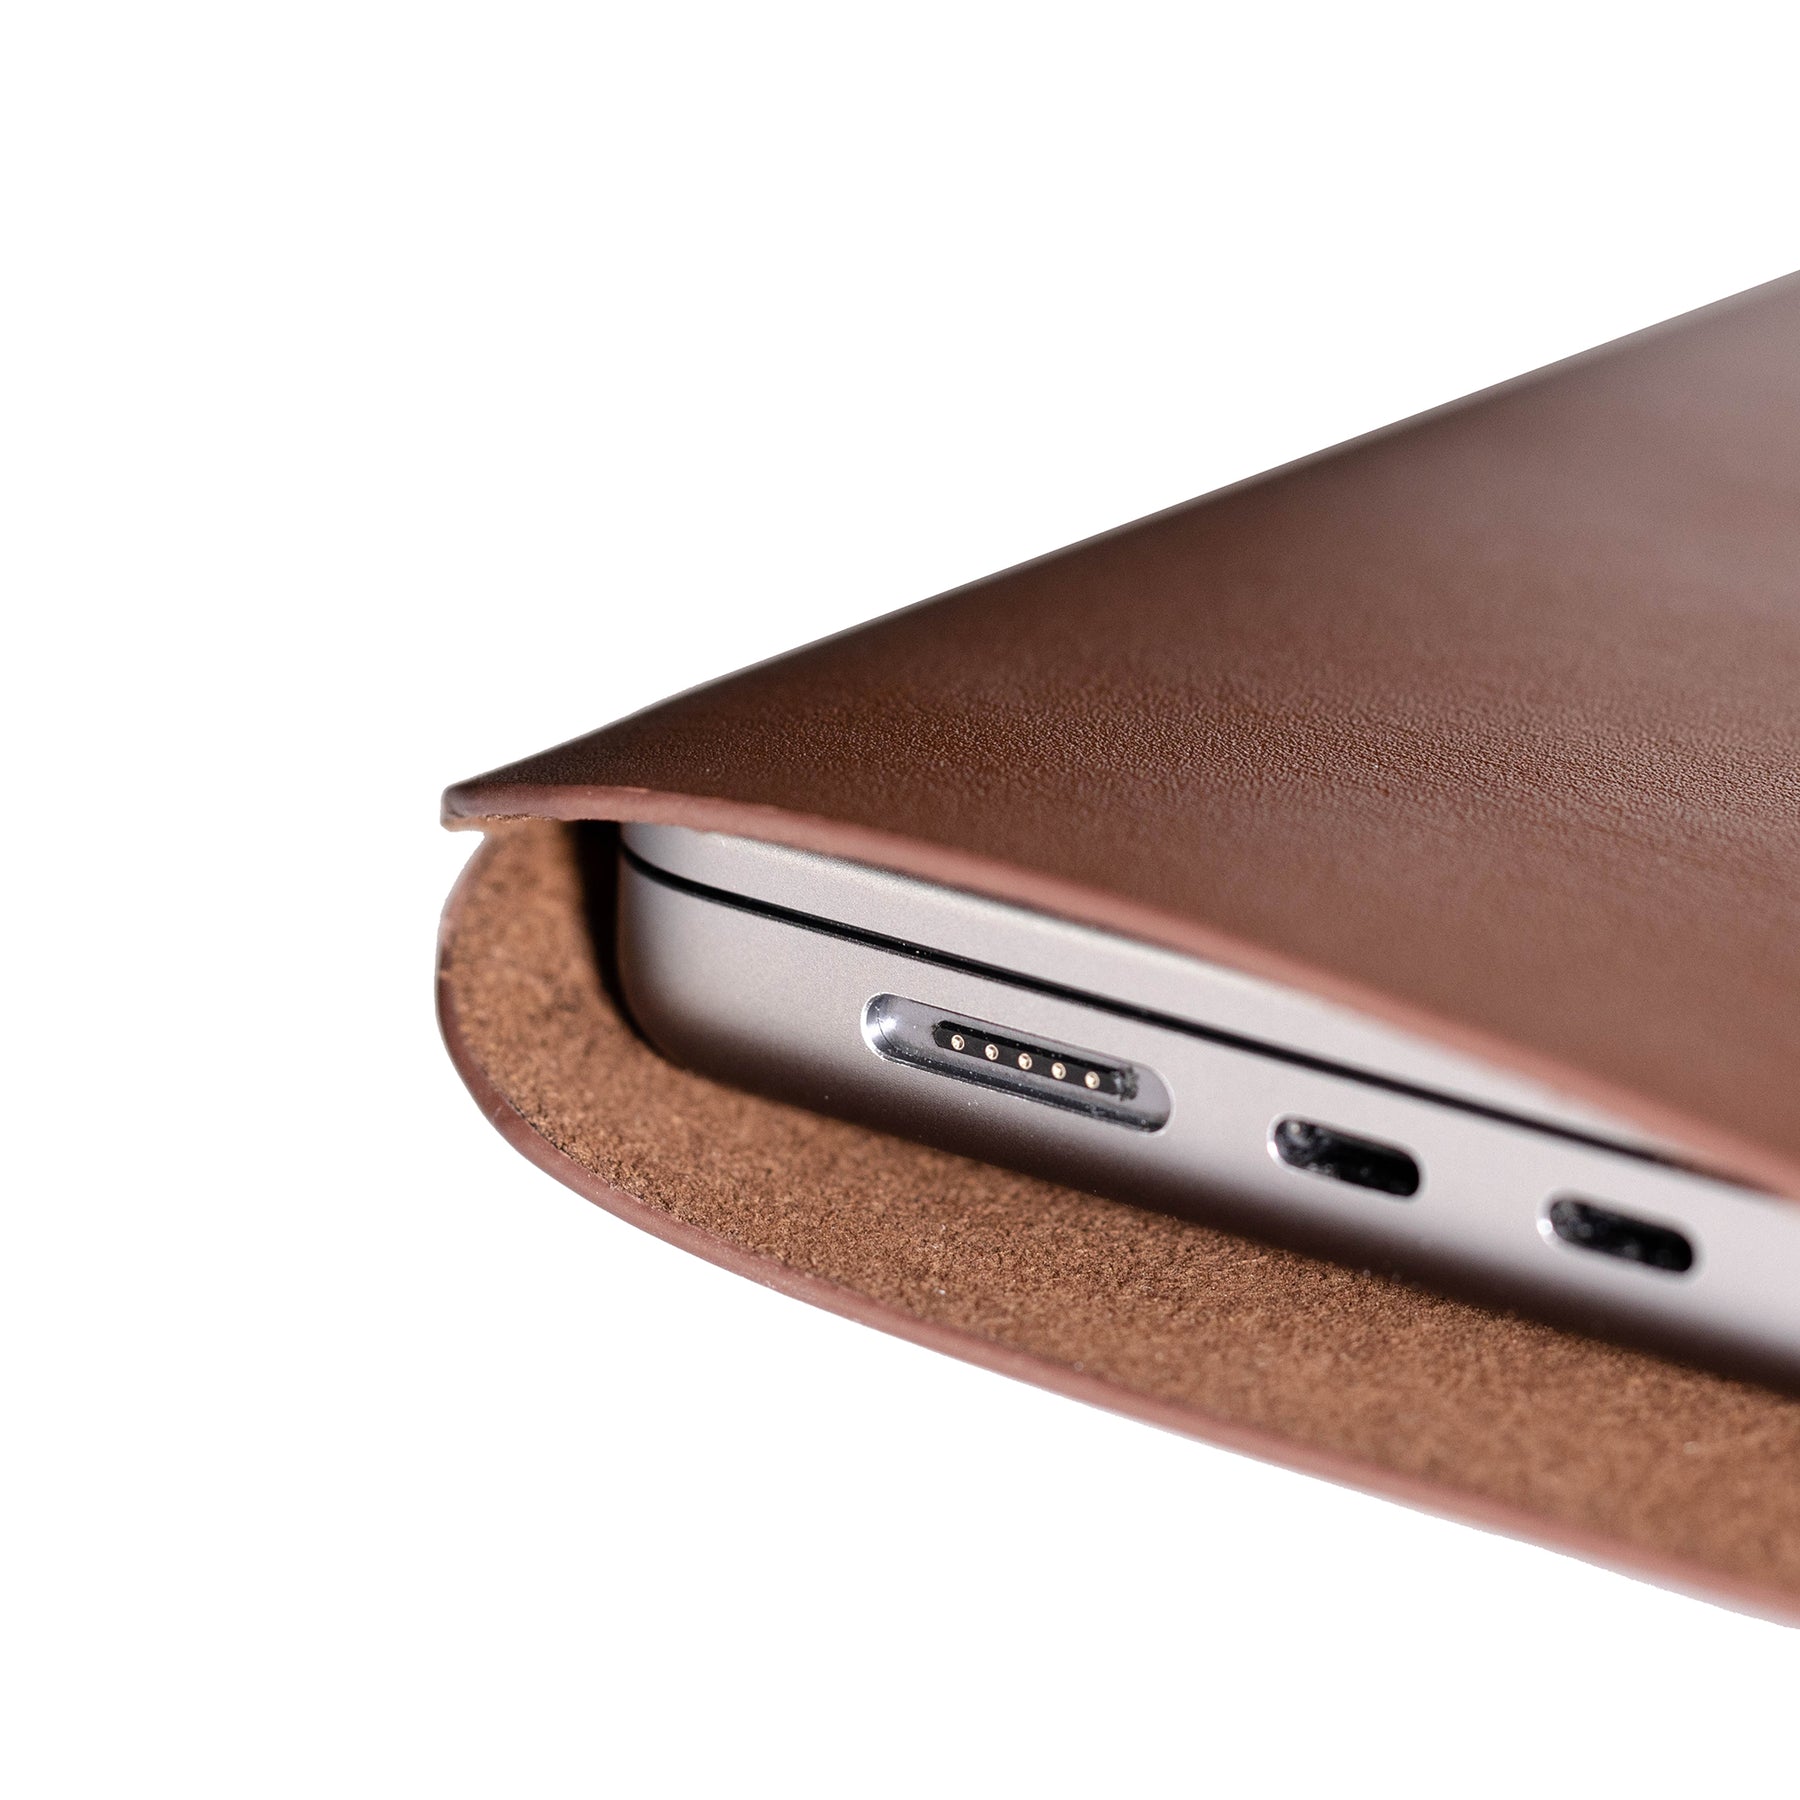 Leather Edition - MacBook Pro/Air Sleeve 16" & 15"